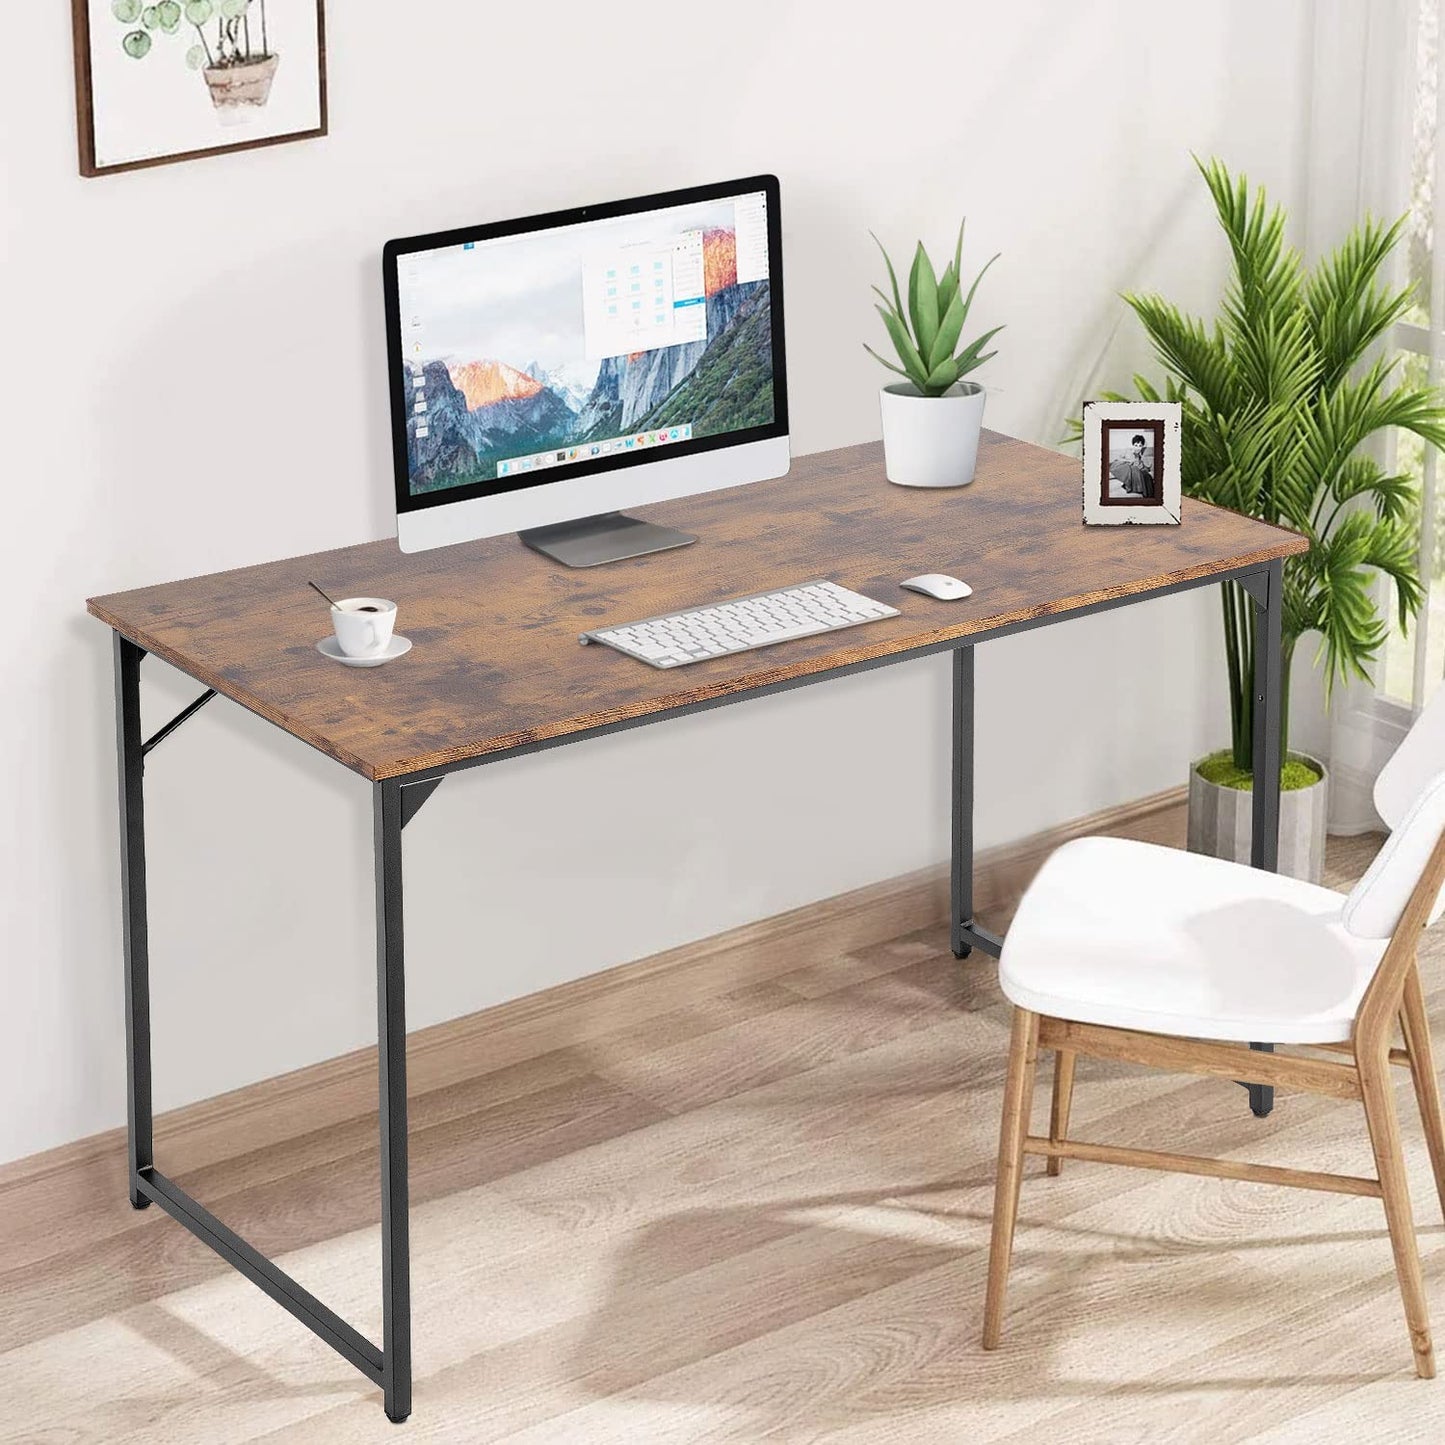 PayLessHere Computer Desk 47 inch Length Study Writing Table, Adjustable feet, Modern Furniture for Home Office, Brown